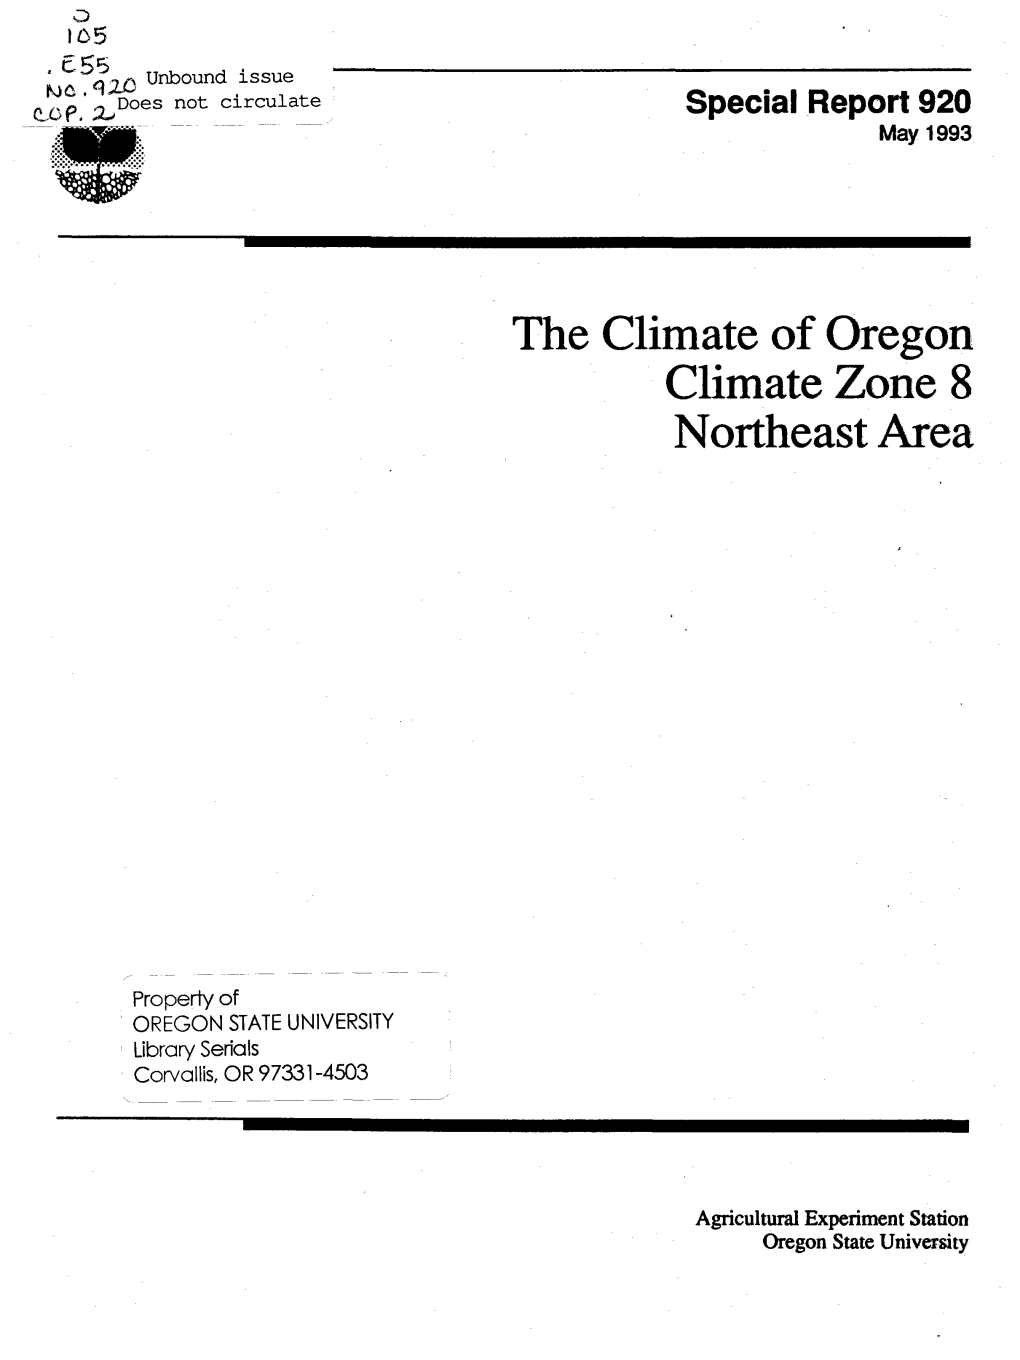 The Climate of Oregon Climate Zone 8 Northeast Area